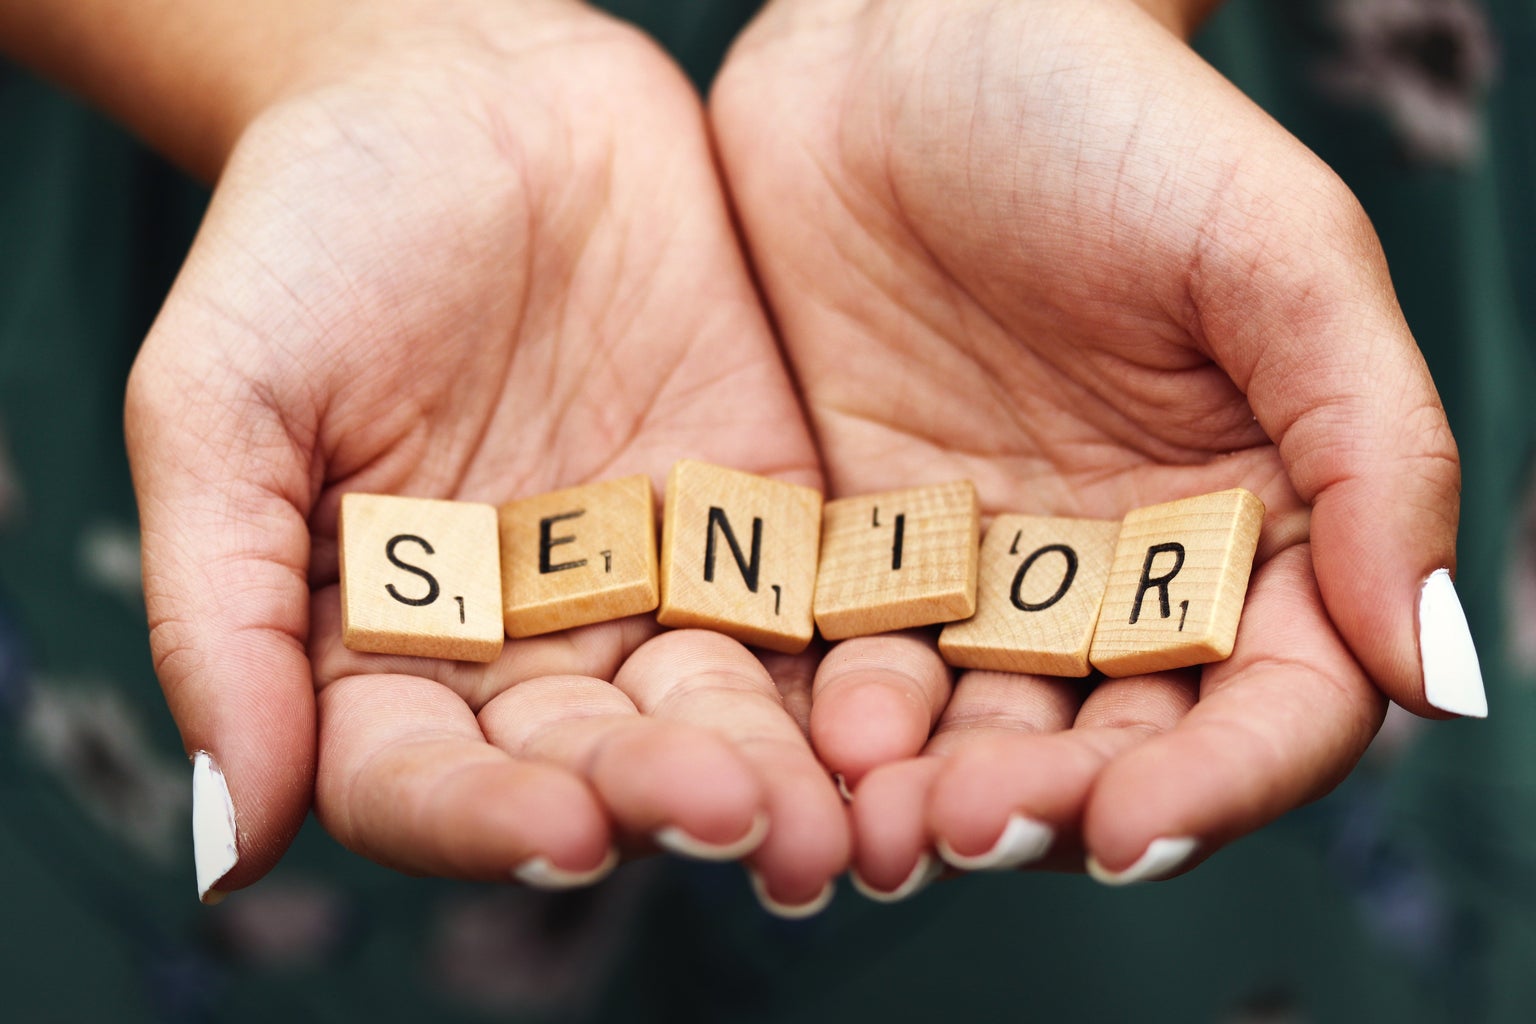 A girl with white nail polish holding scrabble letters spelling the word SENIOR